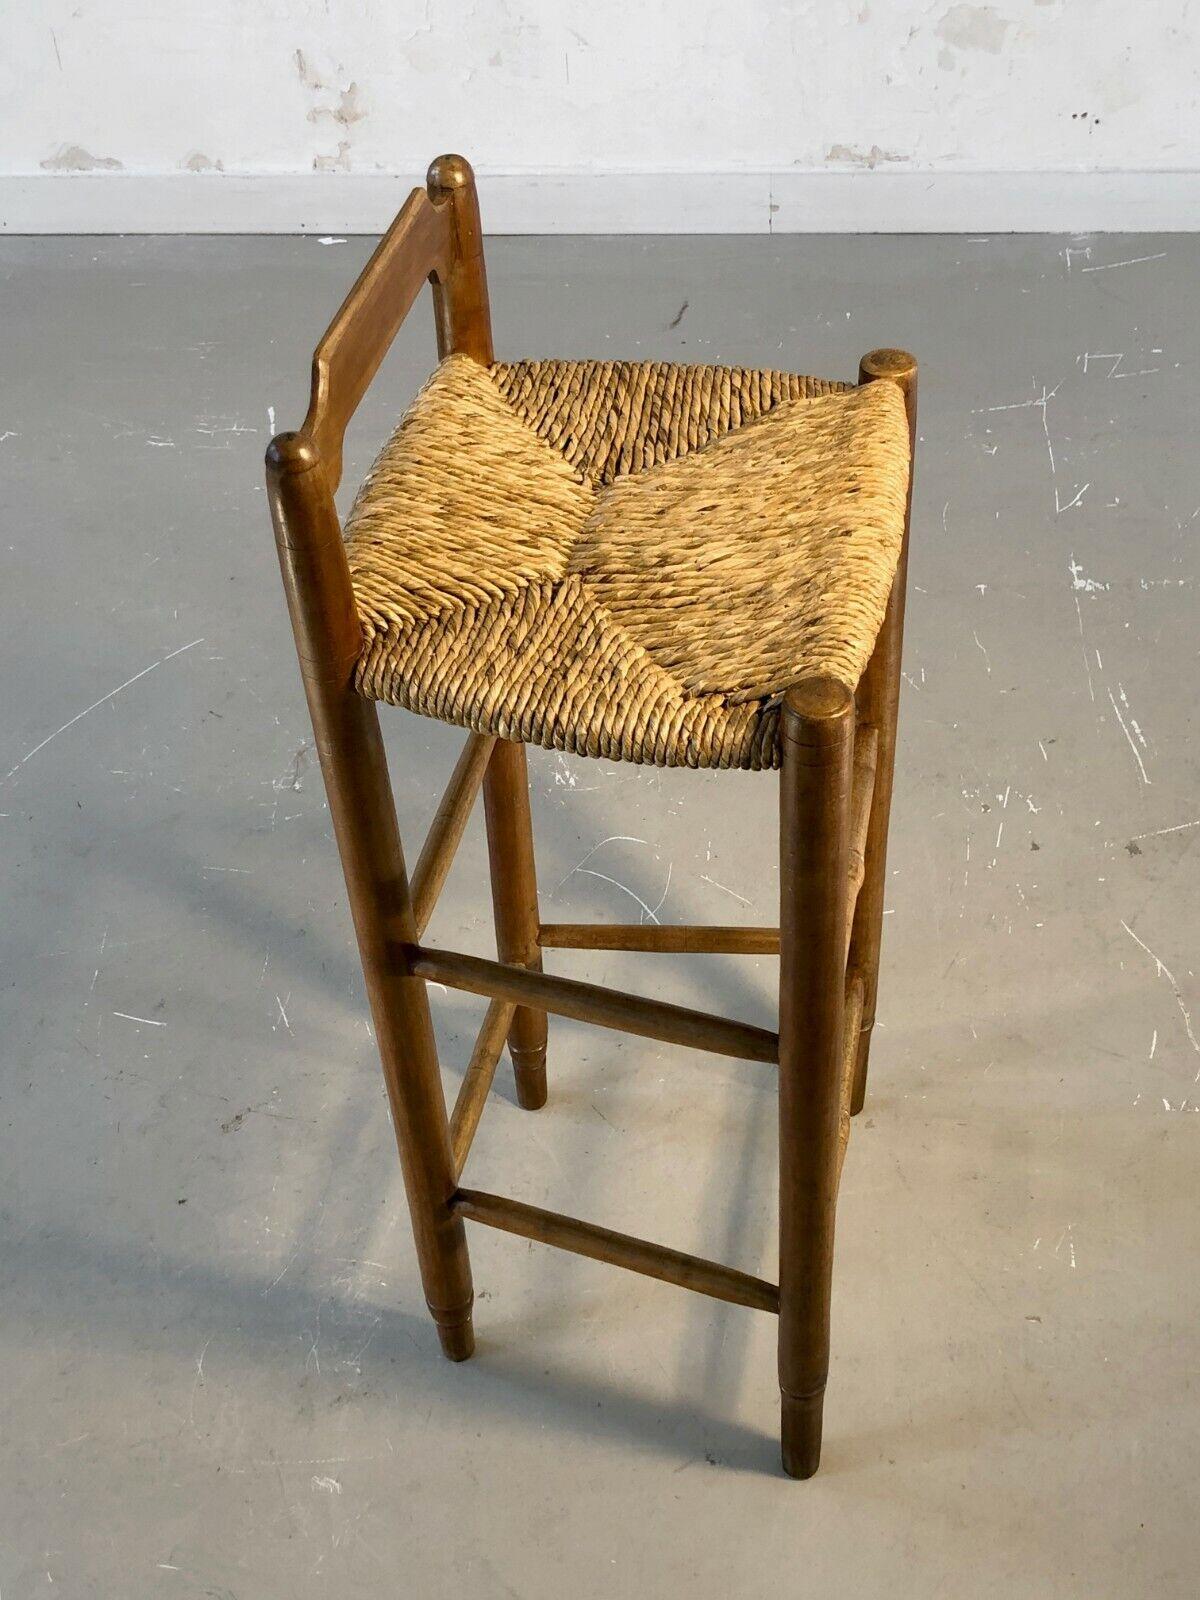 A BRUTALIST MID-CENTURY-MODERN RUSTIC BAR STOOL CHAIR, France 1950 For Sale 3